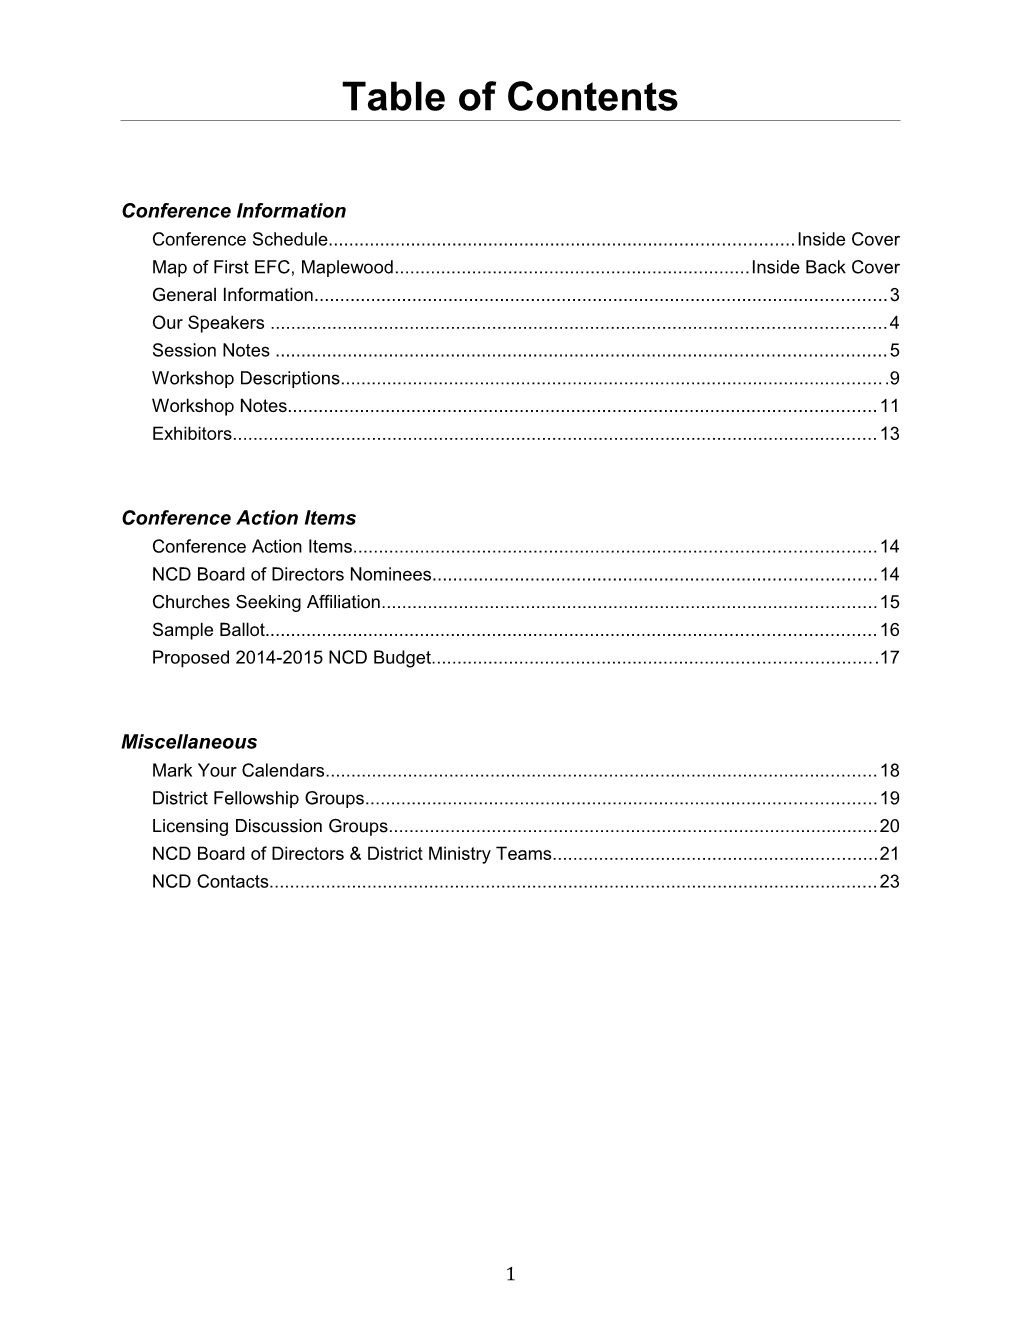 Table of Contents s307